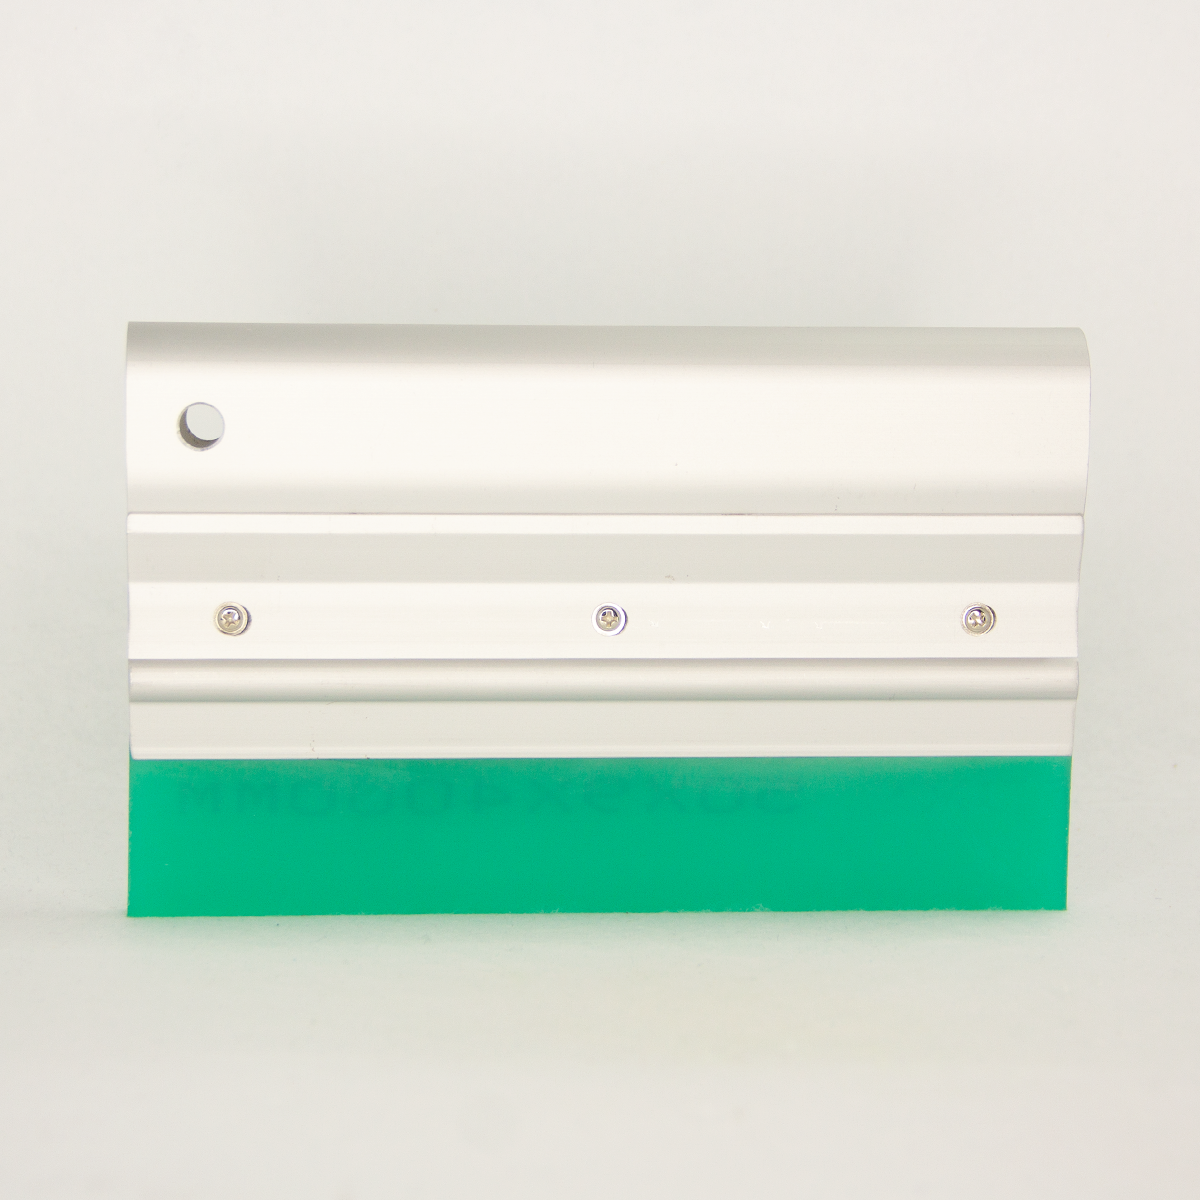 8" Inch - Metal Squeegee